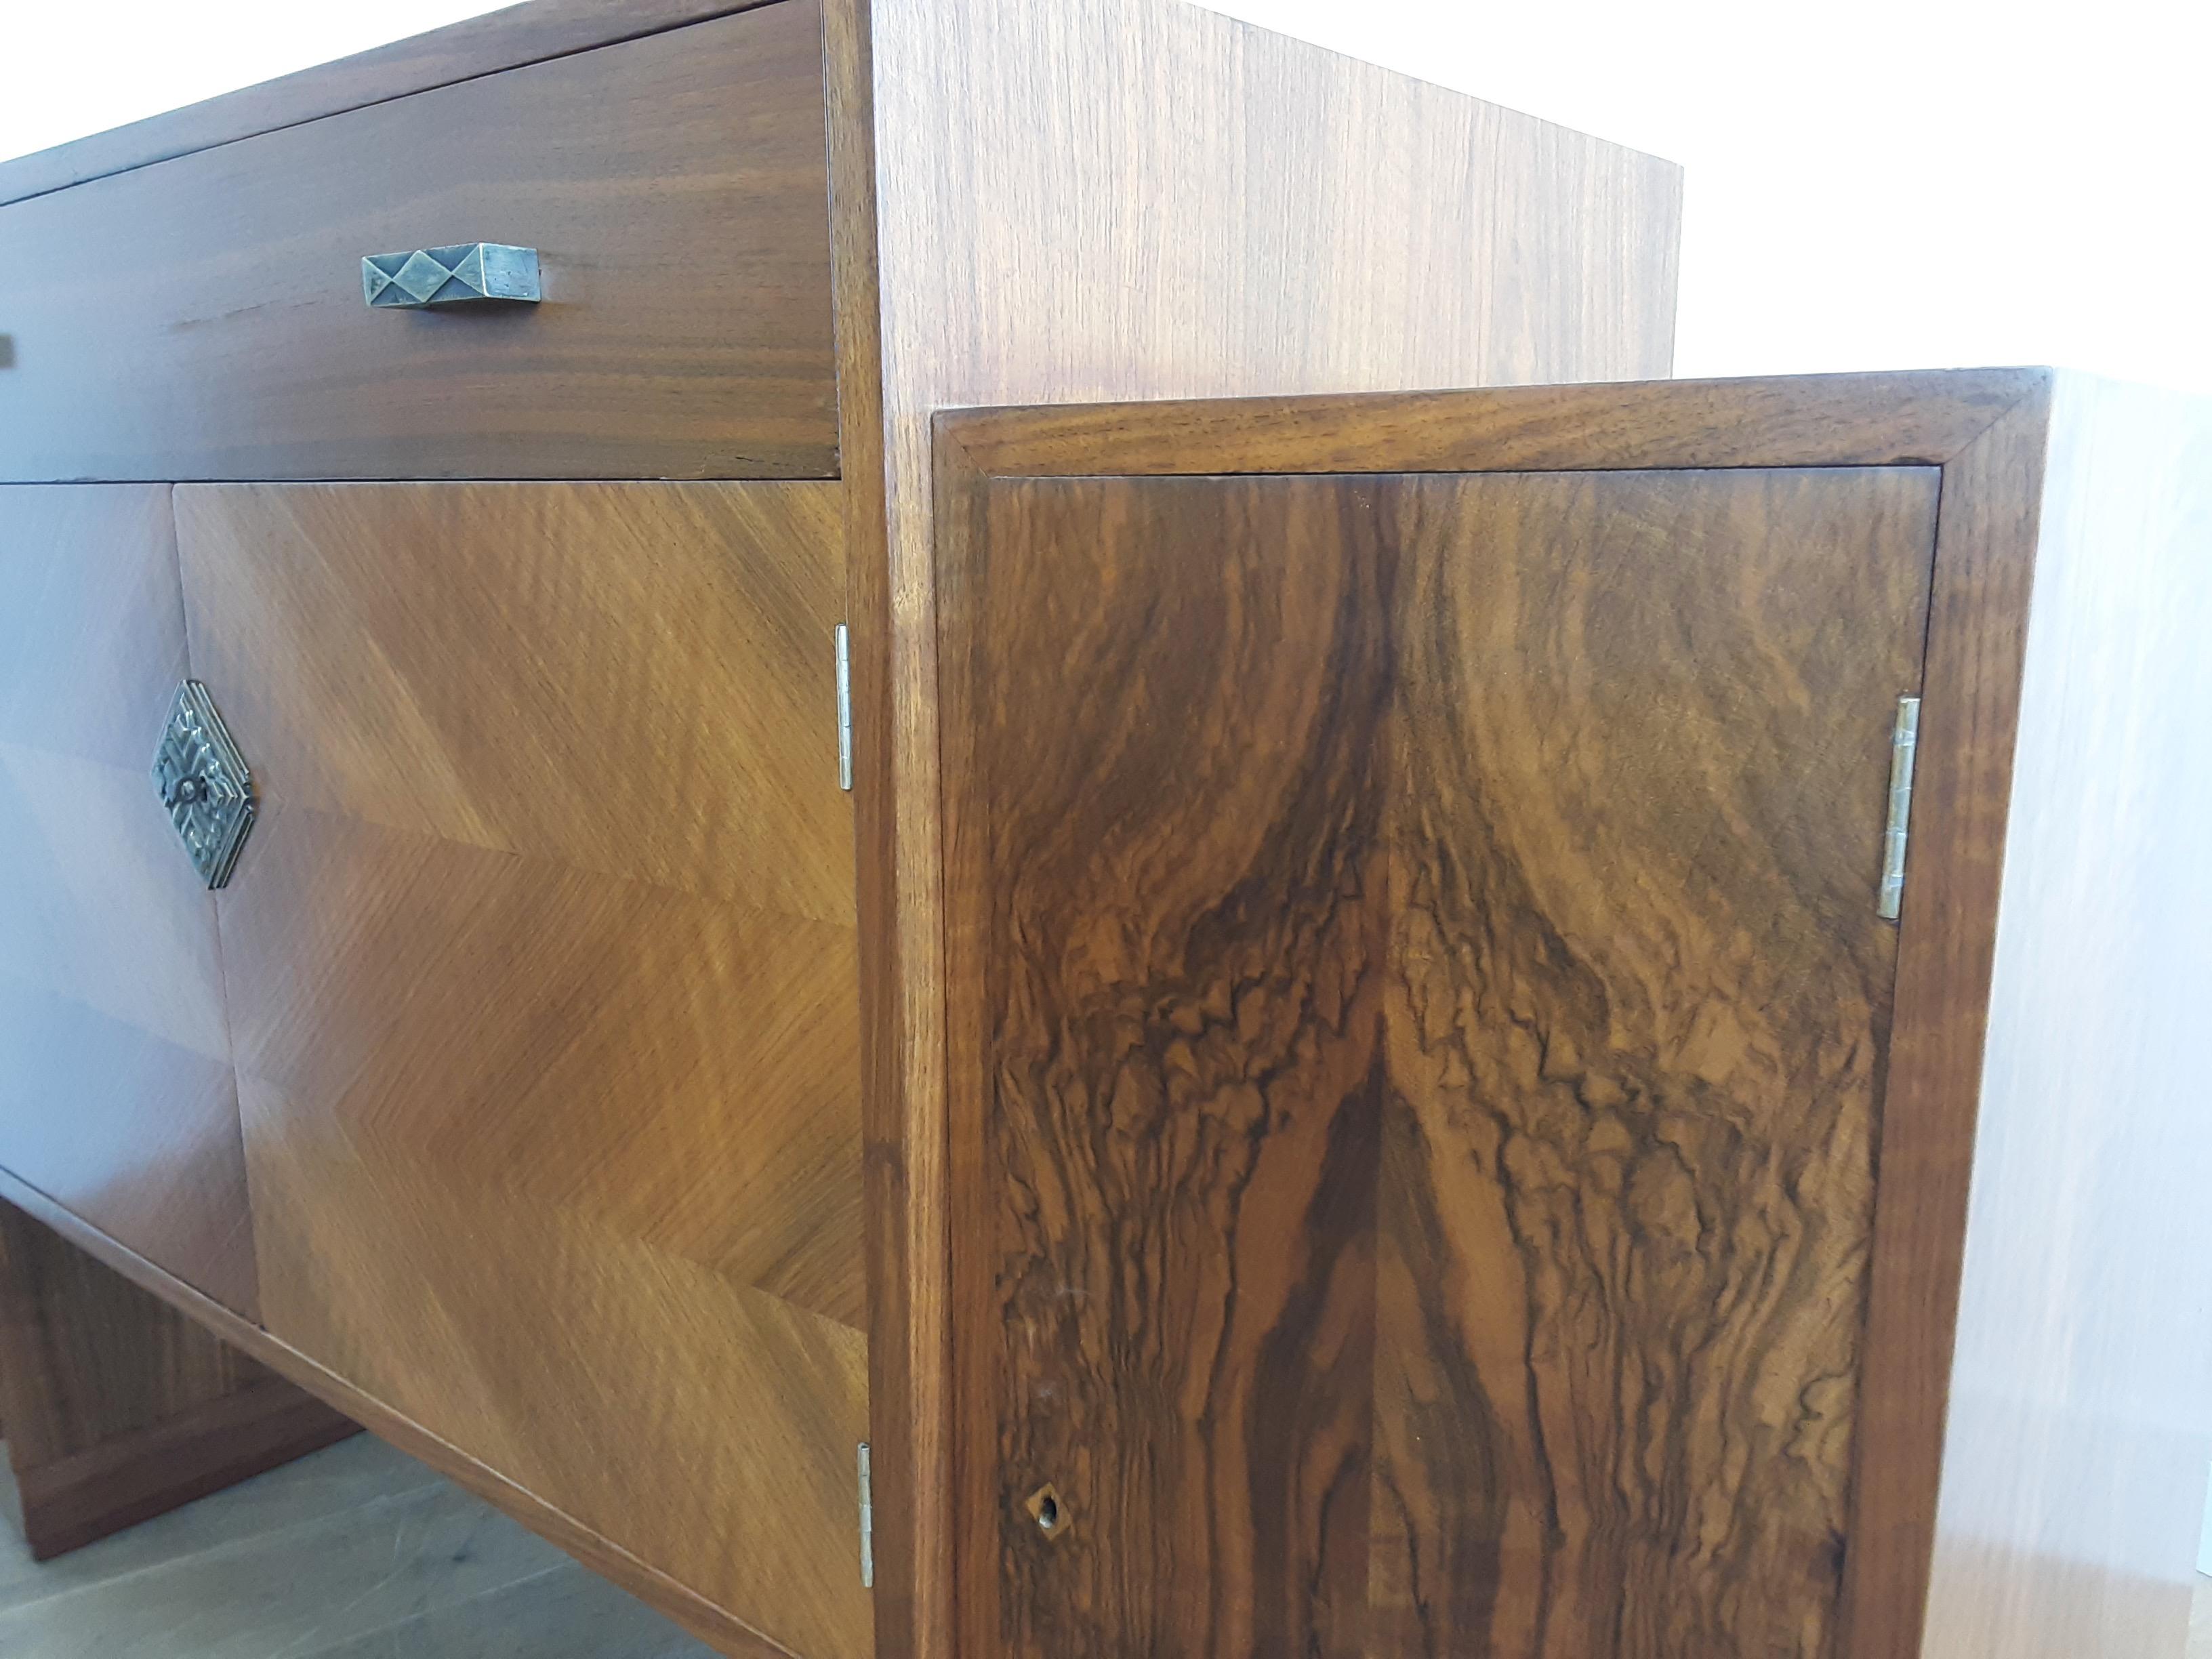 British Art Deco Walnut Sideboard with Stunning Diamond and Burr Veneers In Good Condition For Sale In London, GB